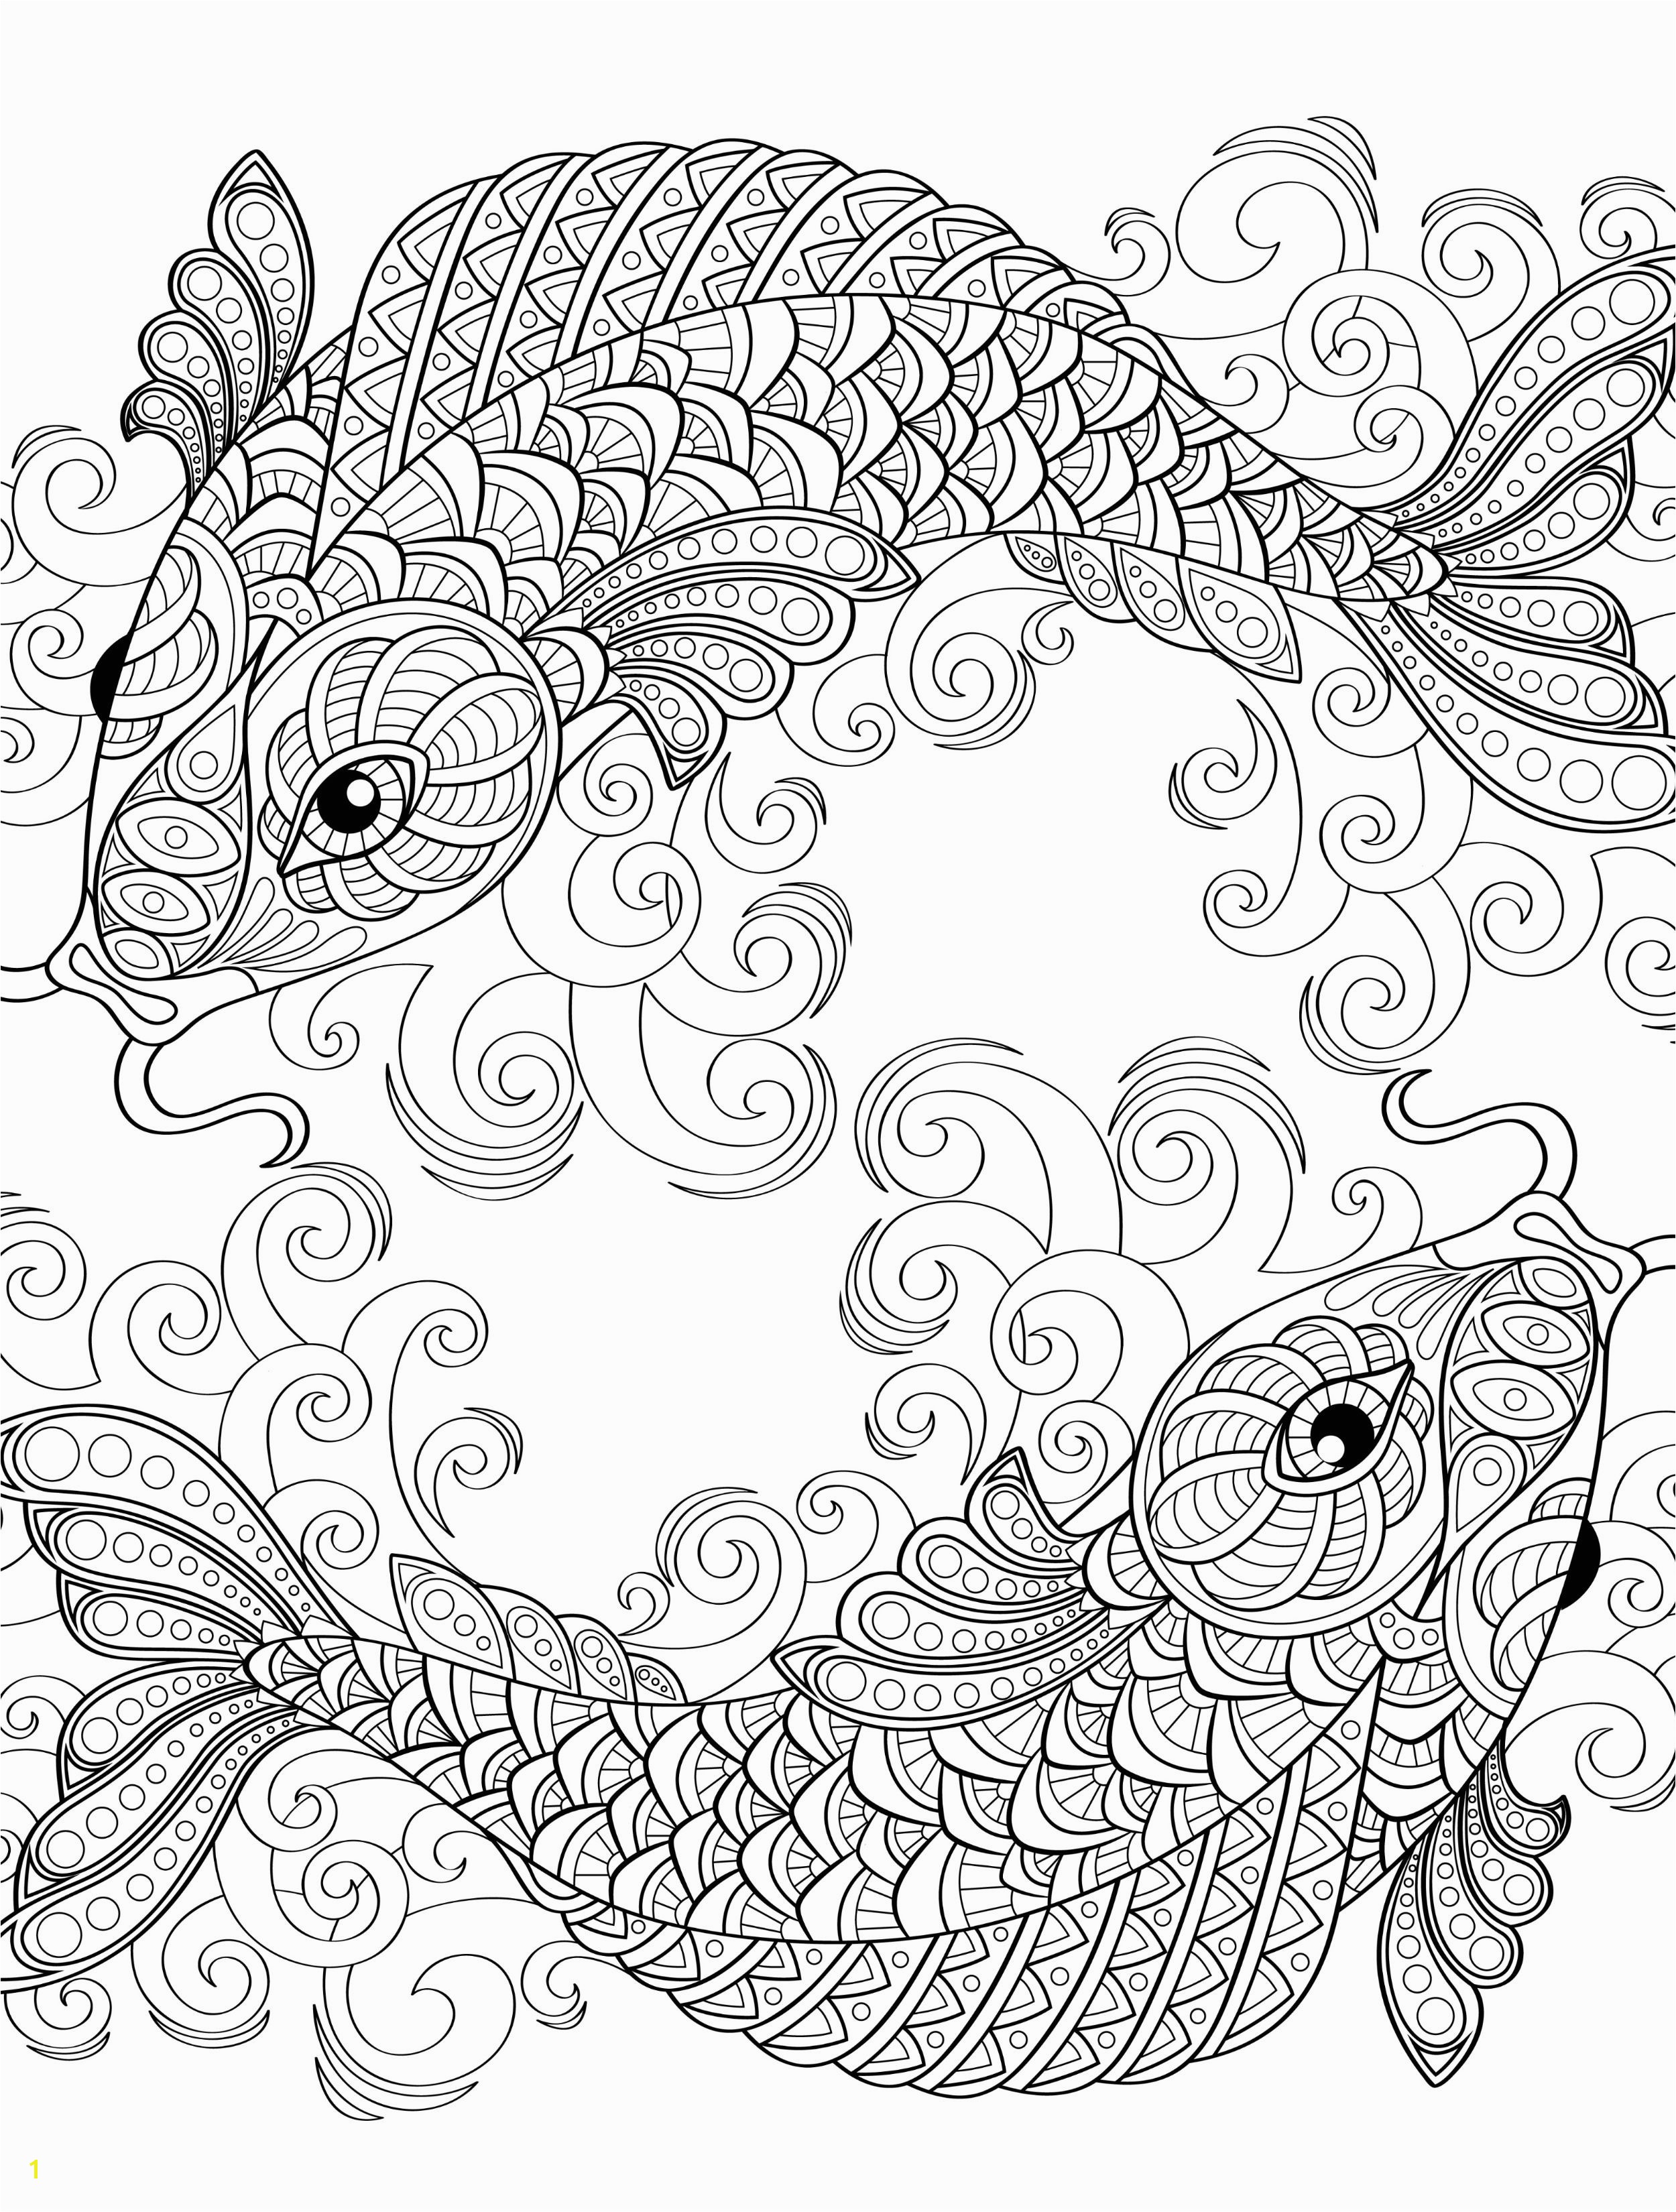 Japanese Koi Fish Coloring Pages 18 Absurdly Whimsical Adult Coloring Pages Coloring